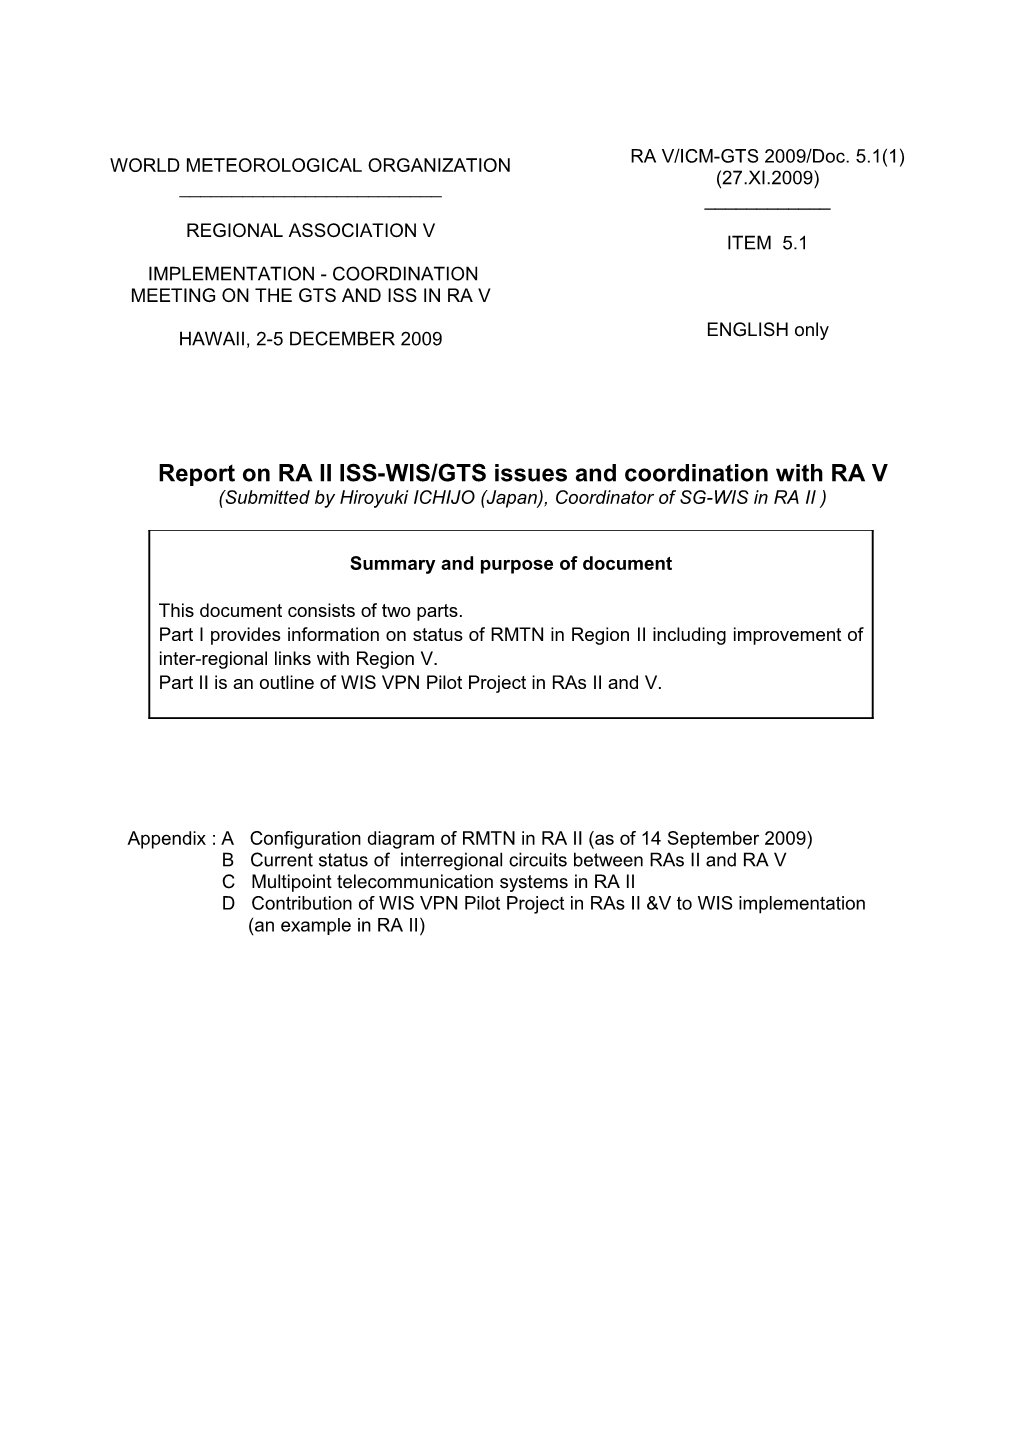 Report on RA II ISS-WIS/GTS Issues and Coordination with RA V